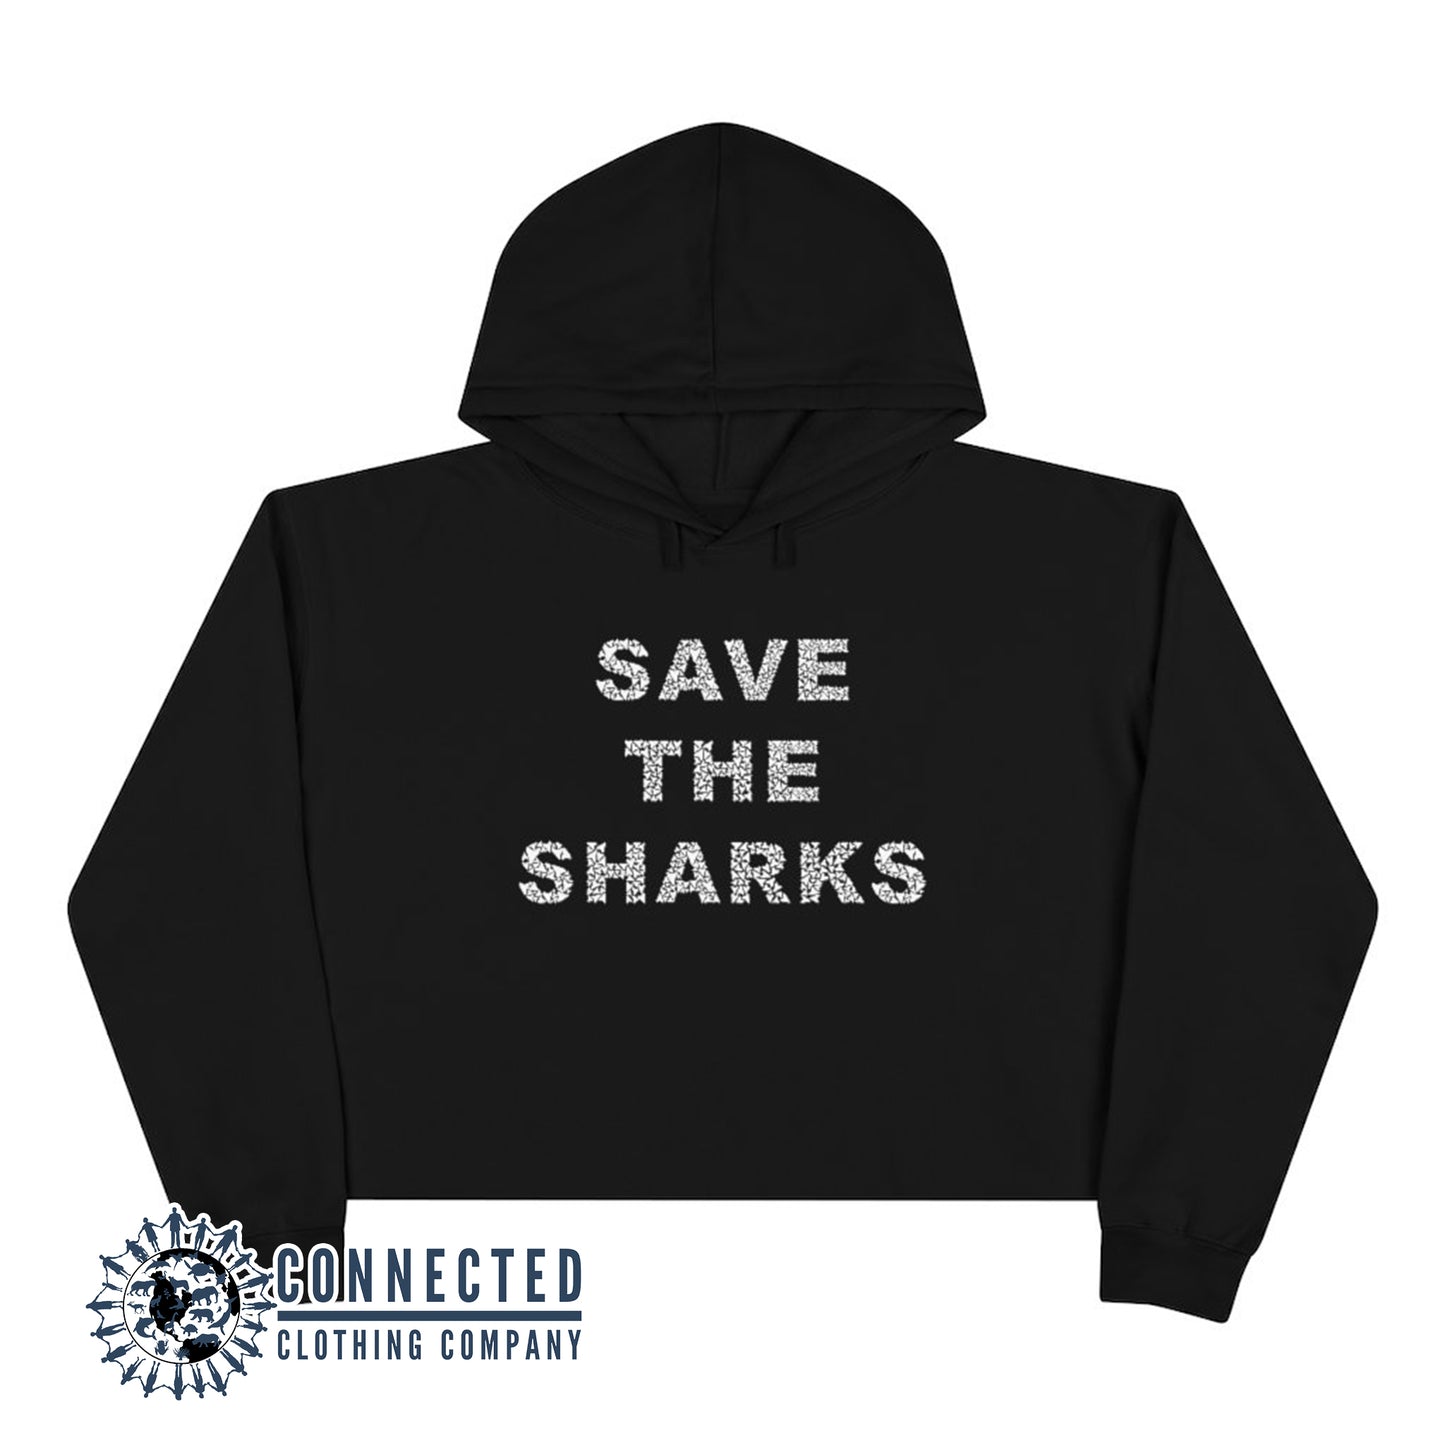 Black Save The Sharks Crop Hoodie - Connected Clothing Company - Ethically and Sustainably Made - 10% donated to Oceana shark conservation